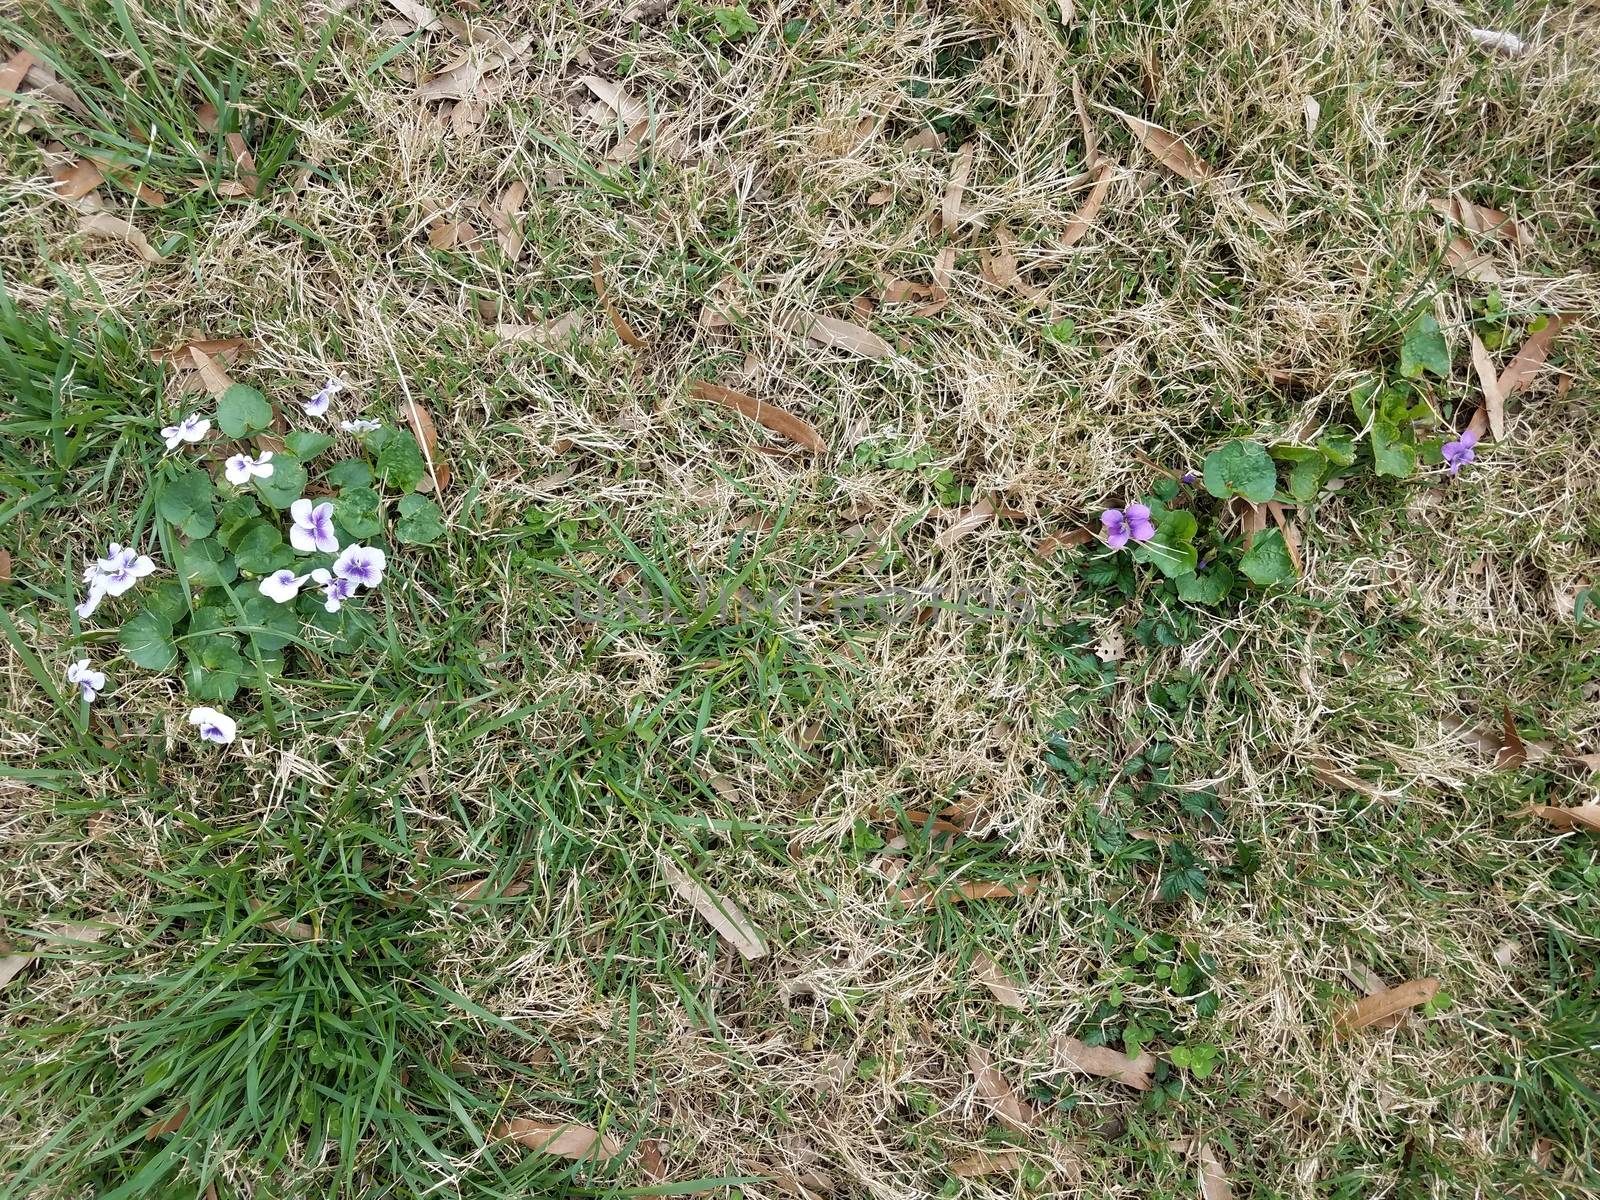 purple and white flower petals and green leaves in the grass or lawn